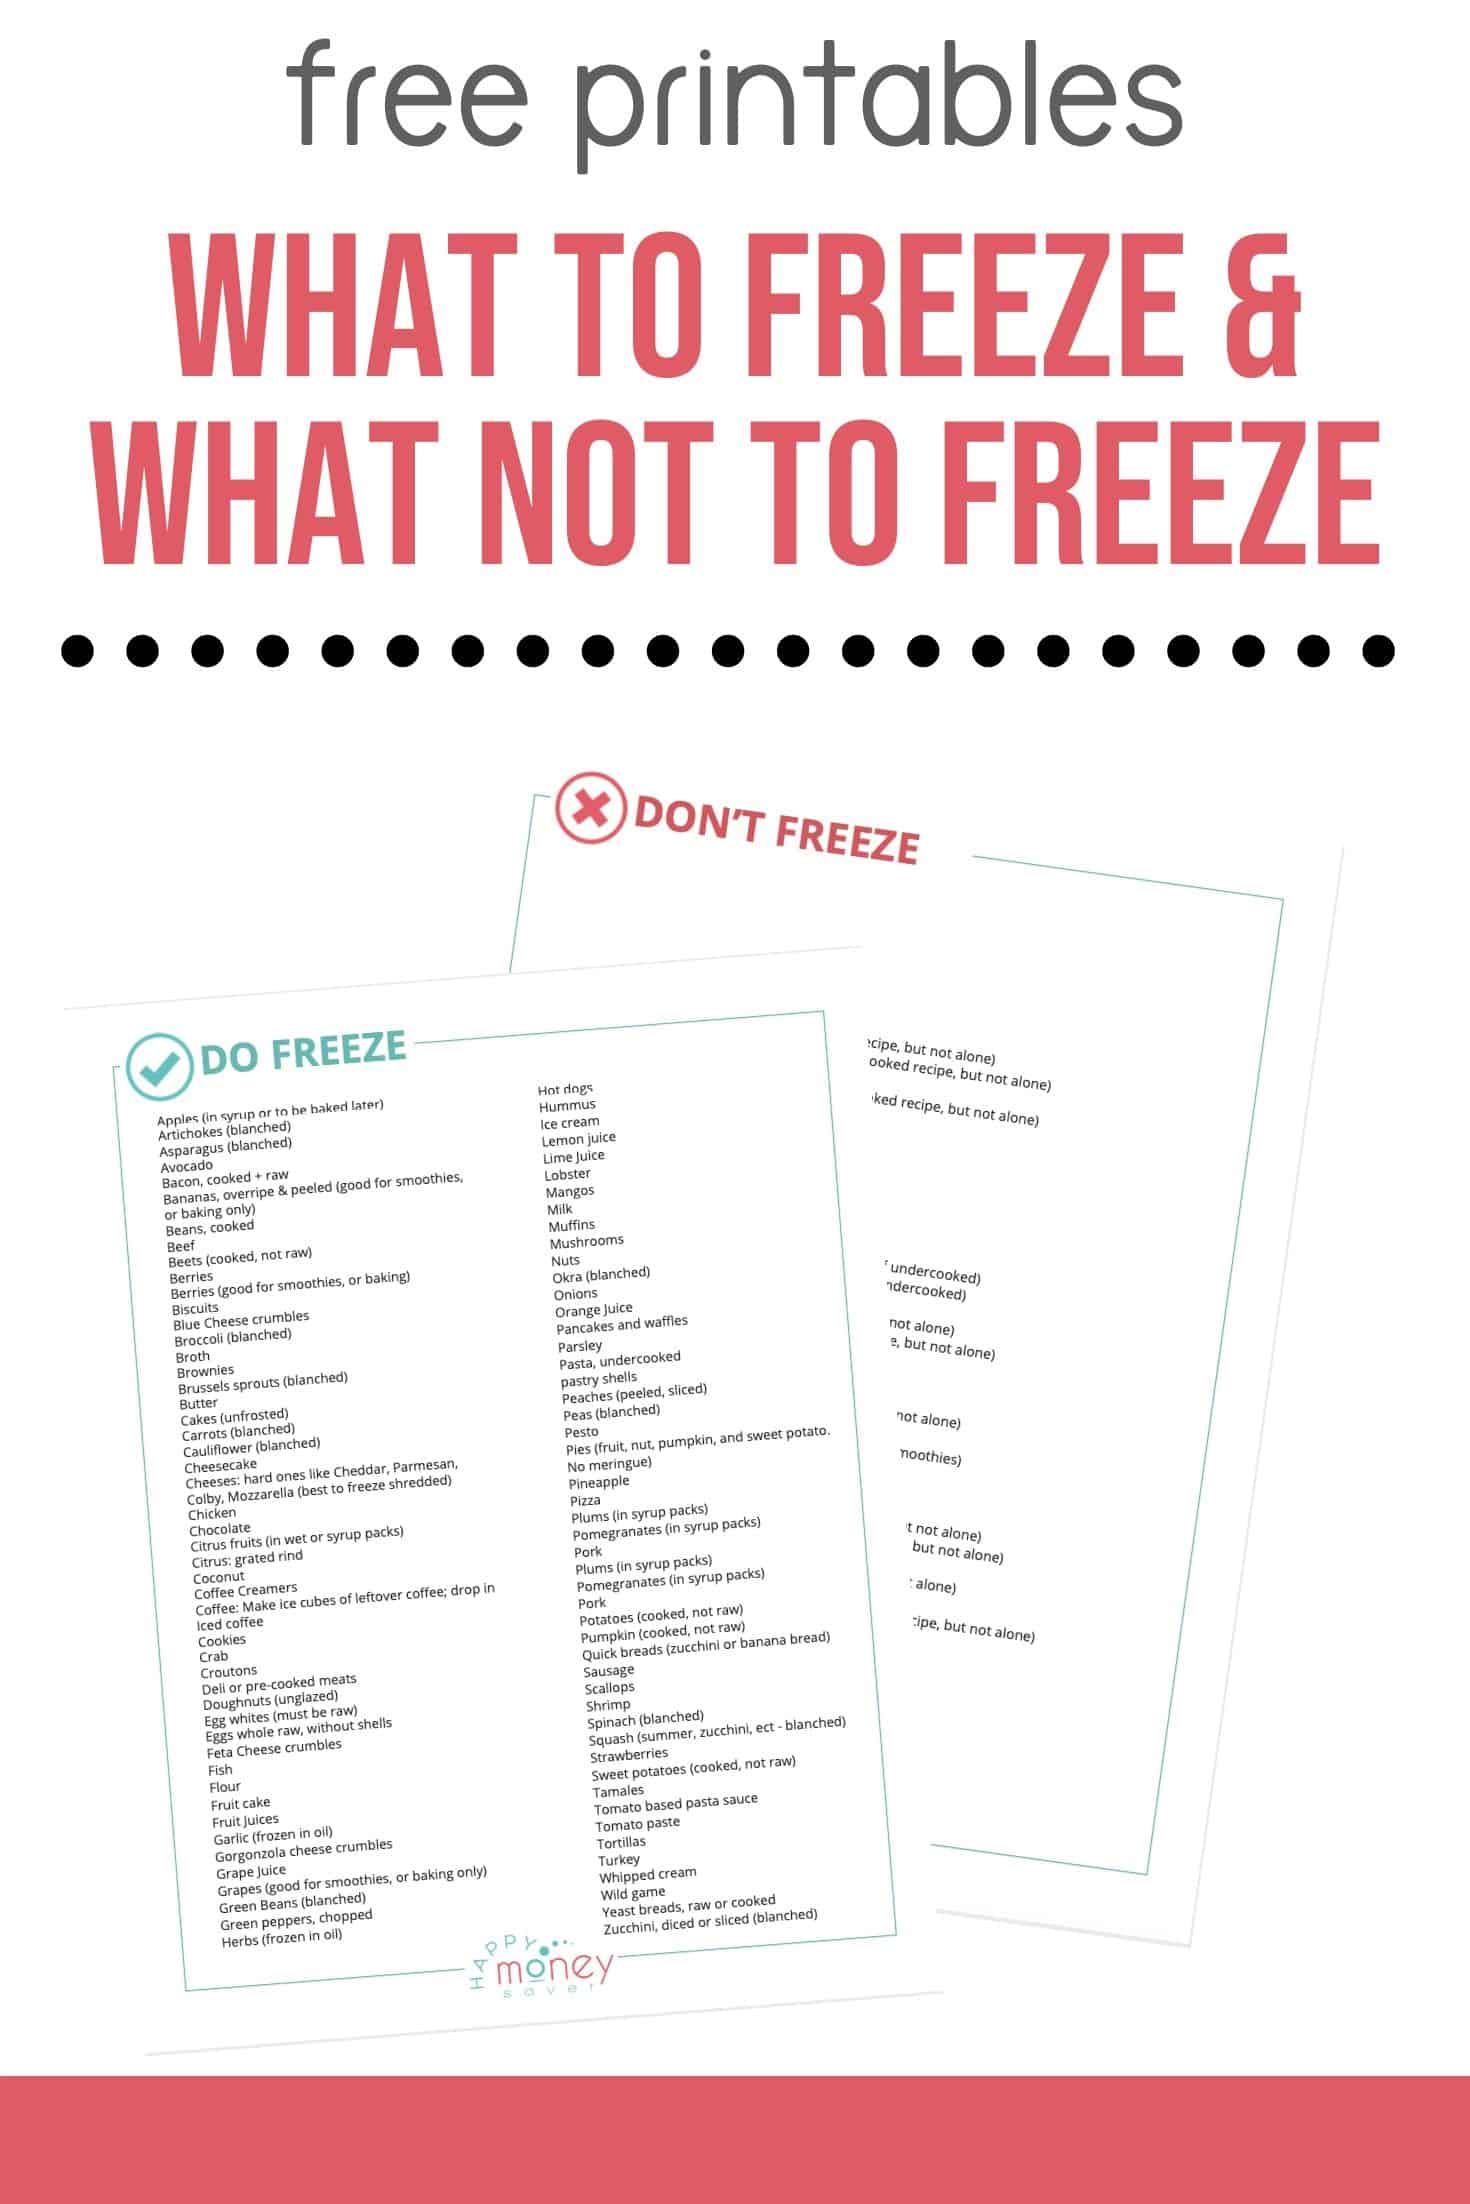 What foods are good to freeze? - Happy Money Saver